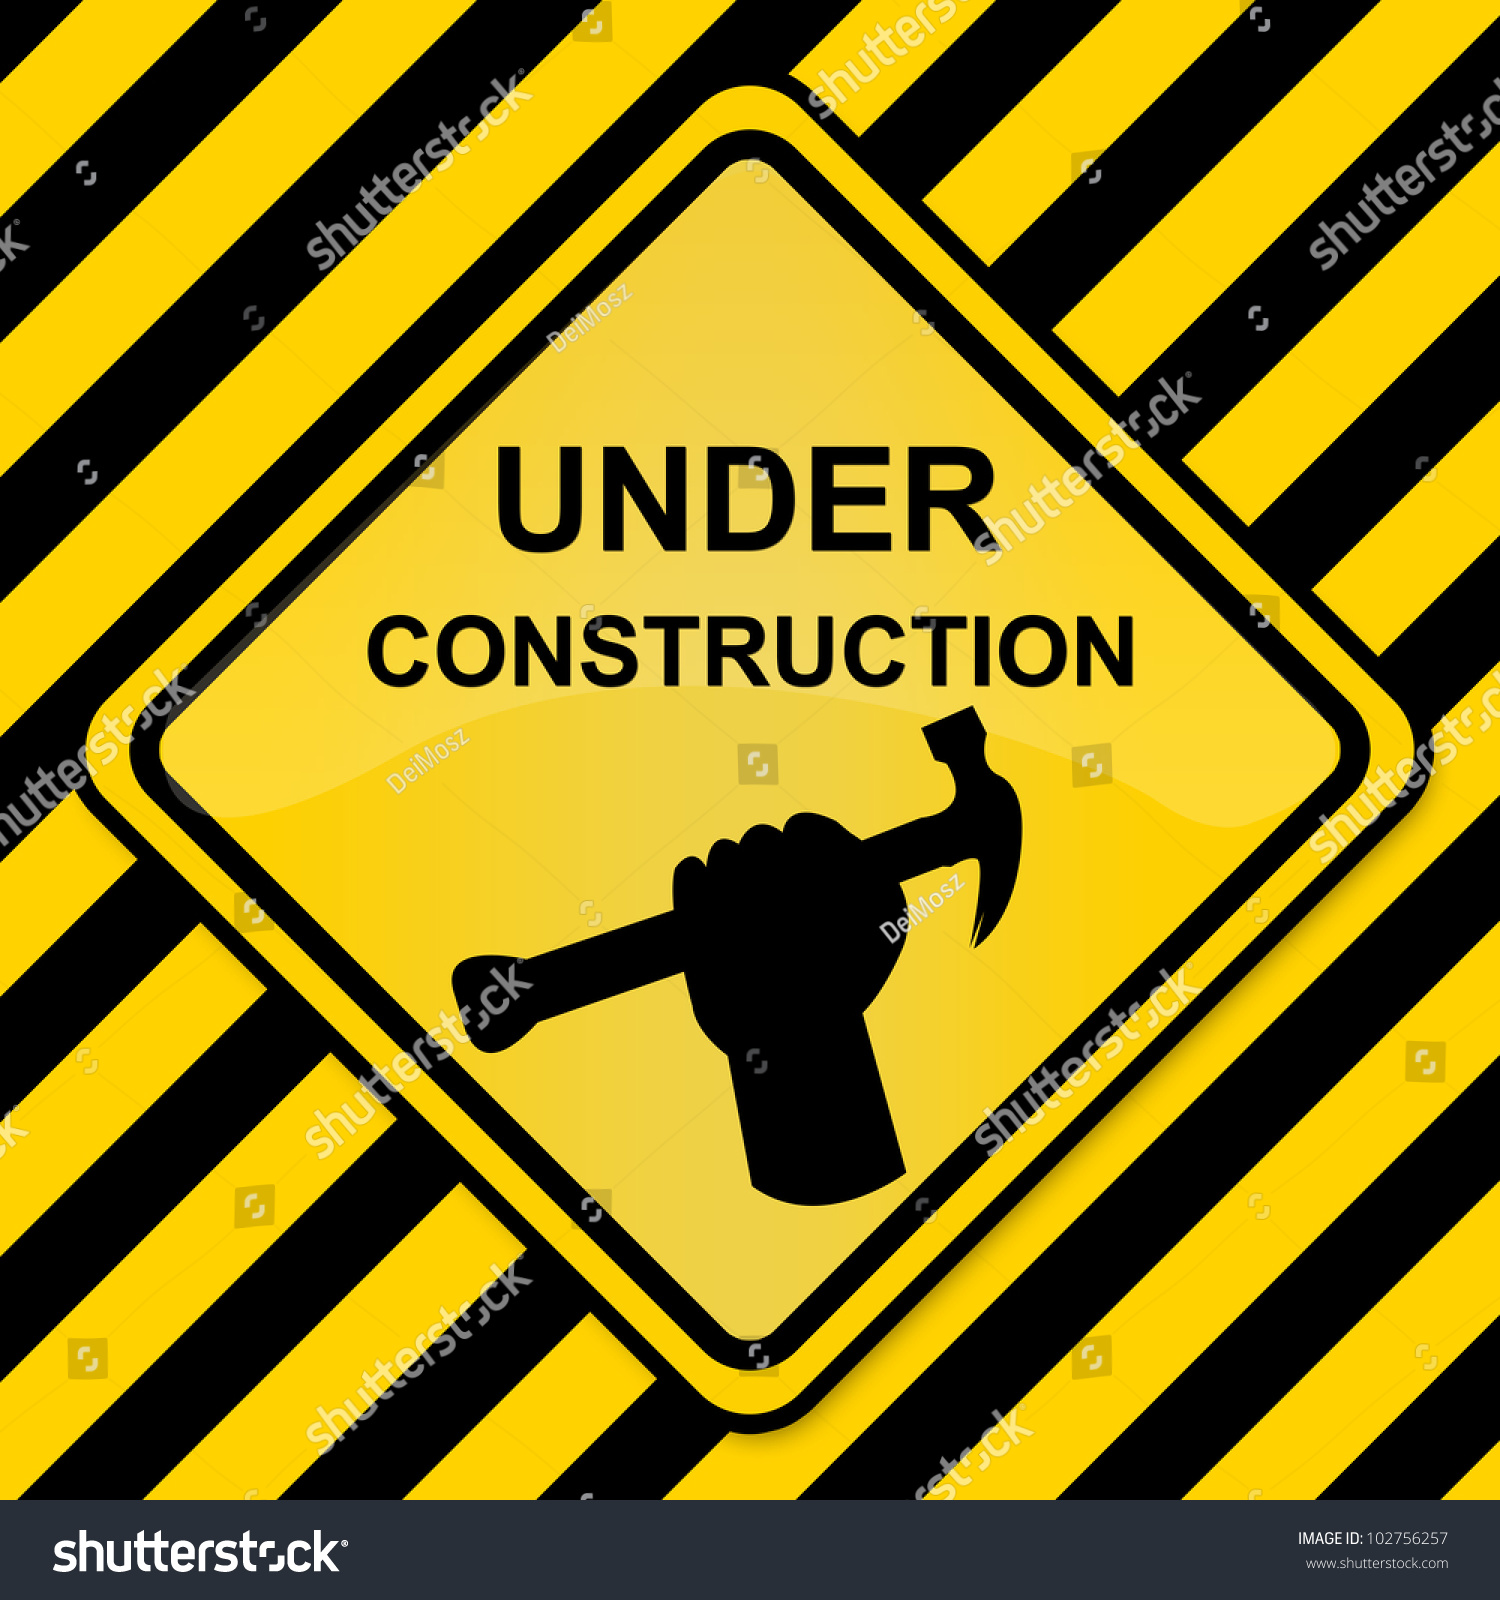 Under Construction Sign With Yellow And Black Line Background Stock ...